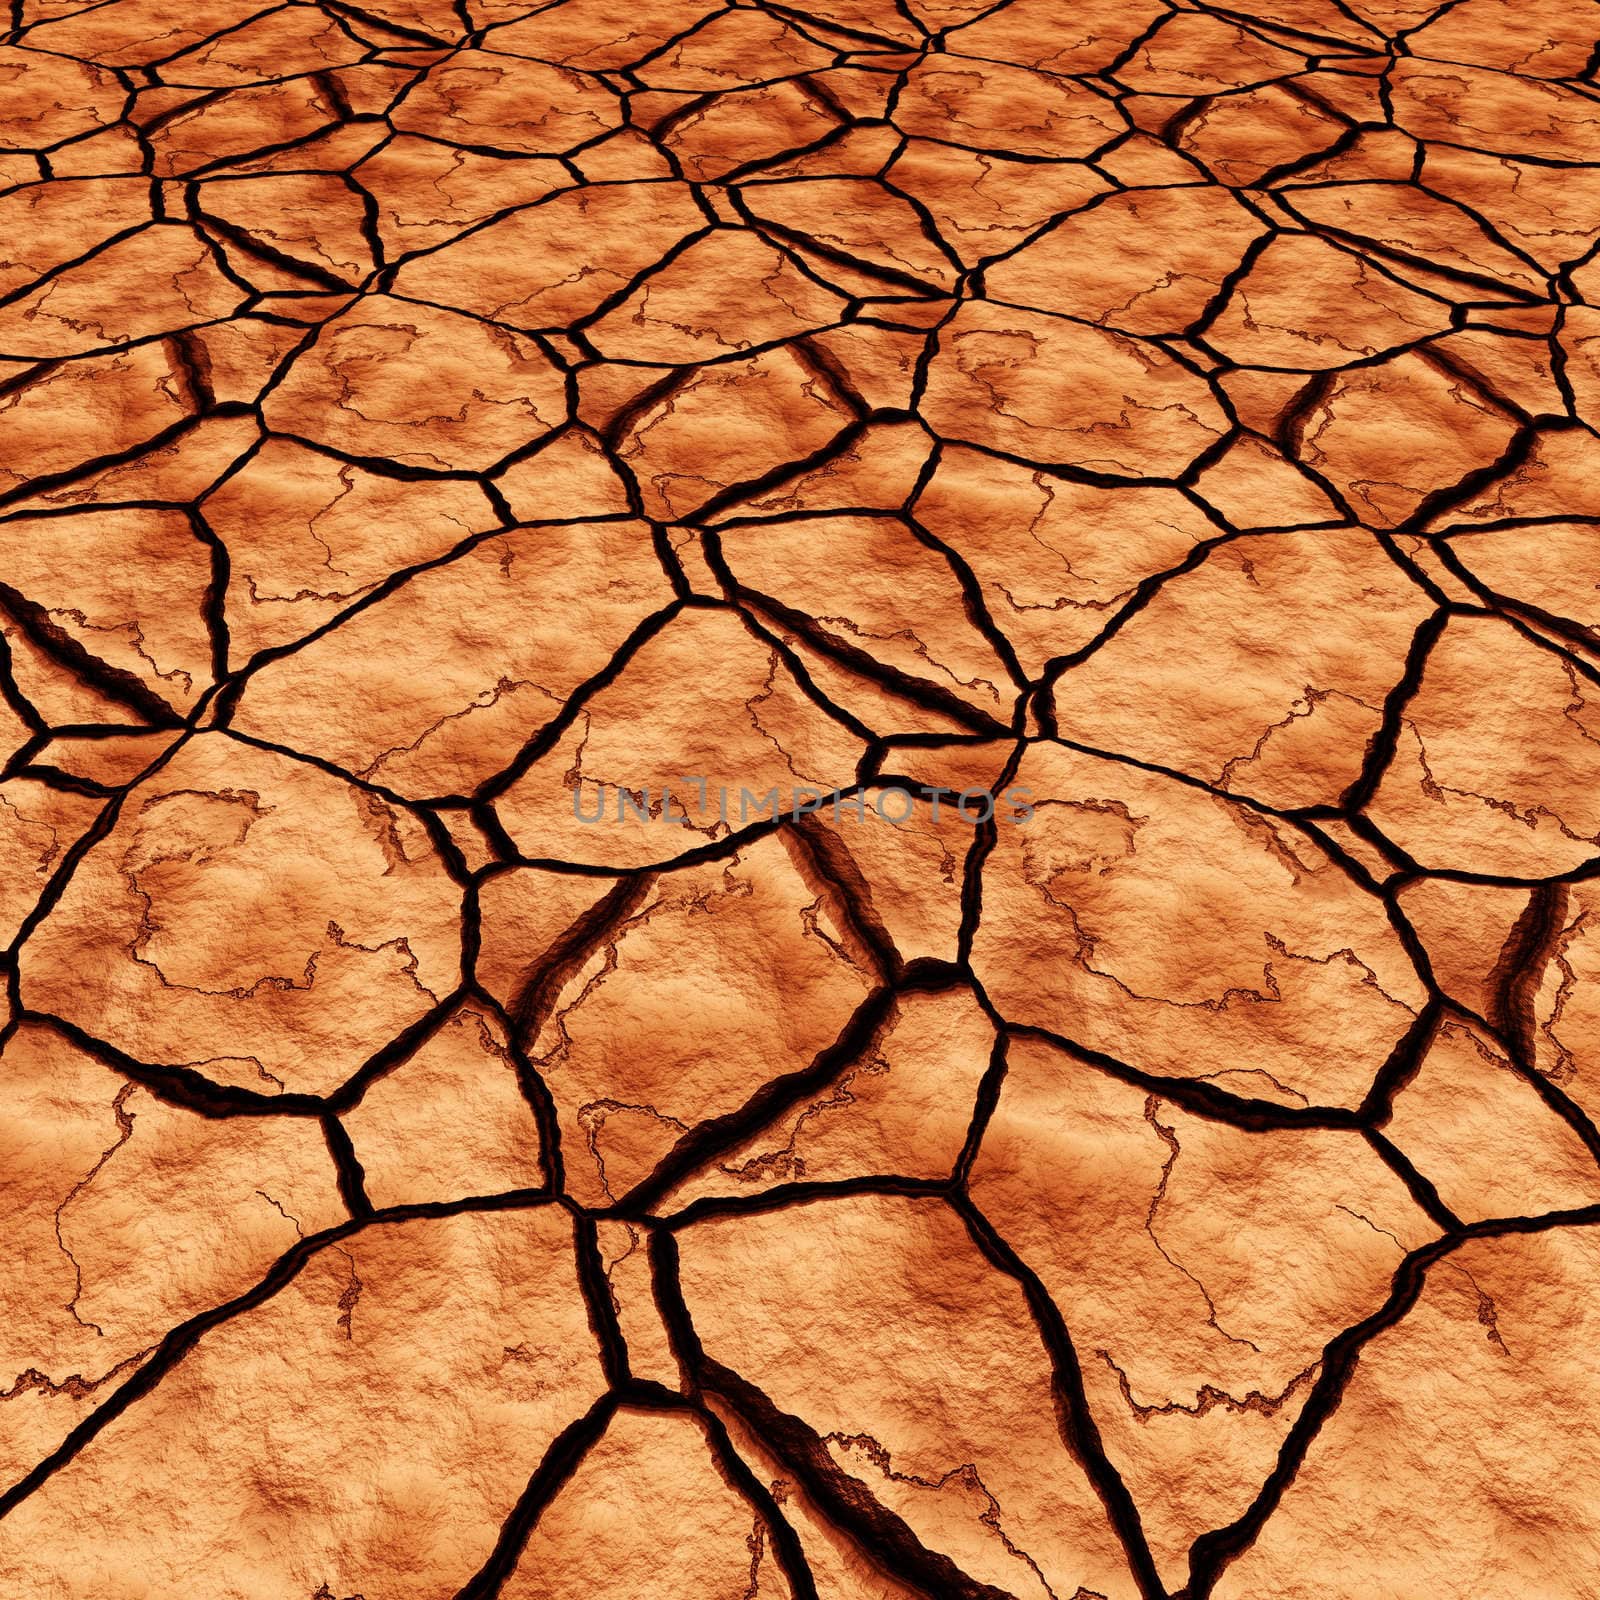 a large image of hot and dry cracked river or lake bed